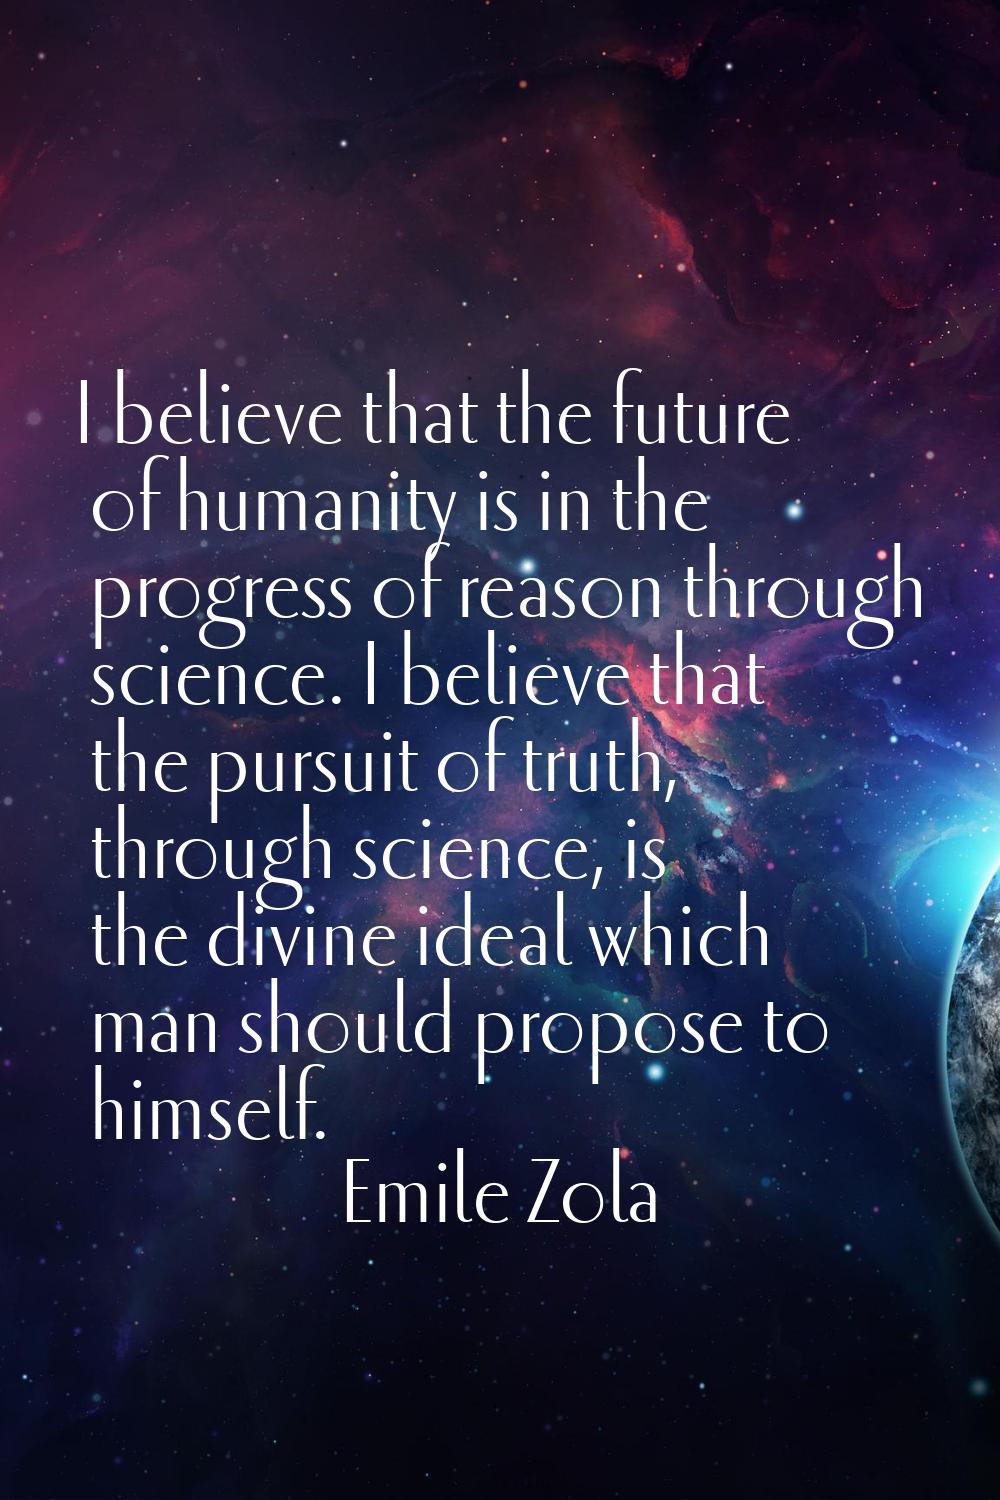 I believe that the future of humanity is in the progress of reason through science. I believe that 